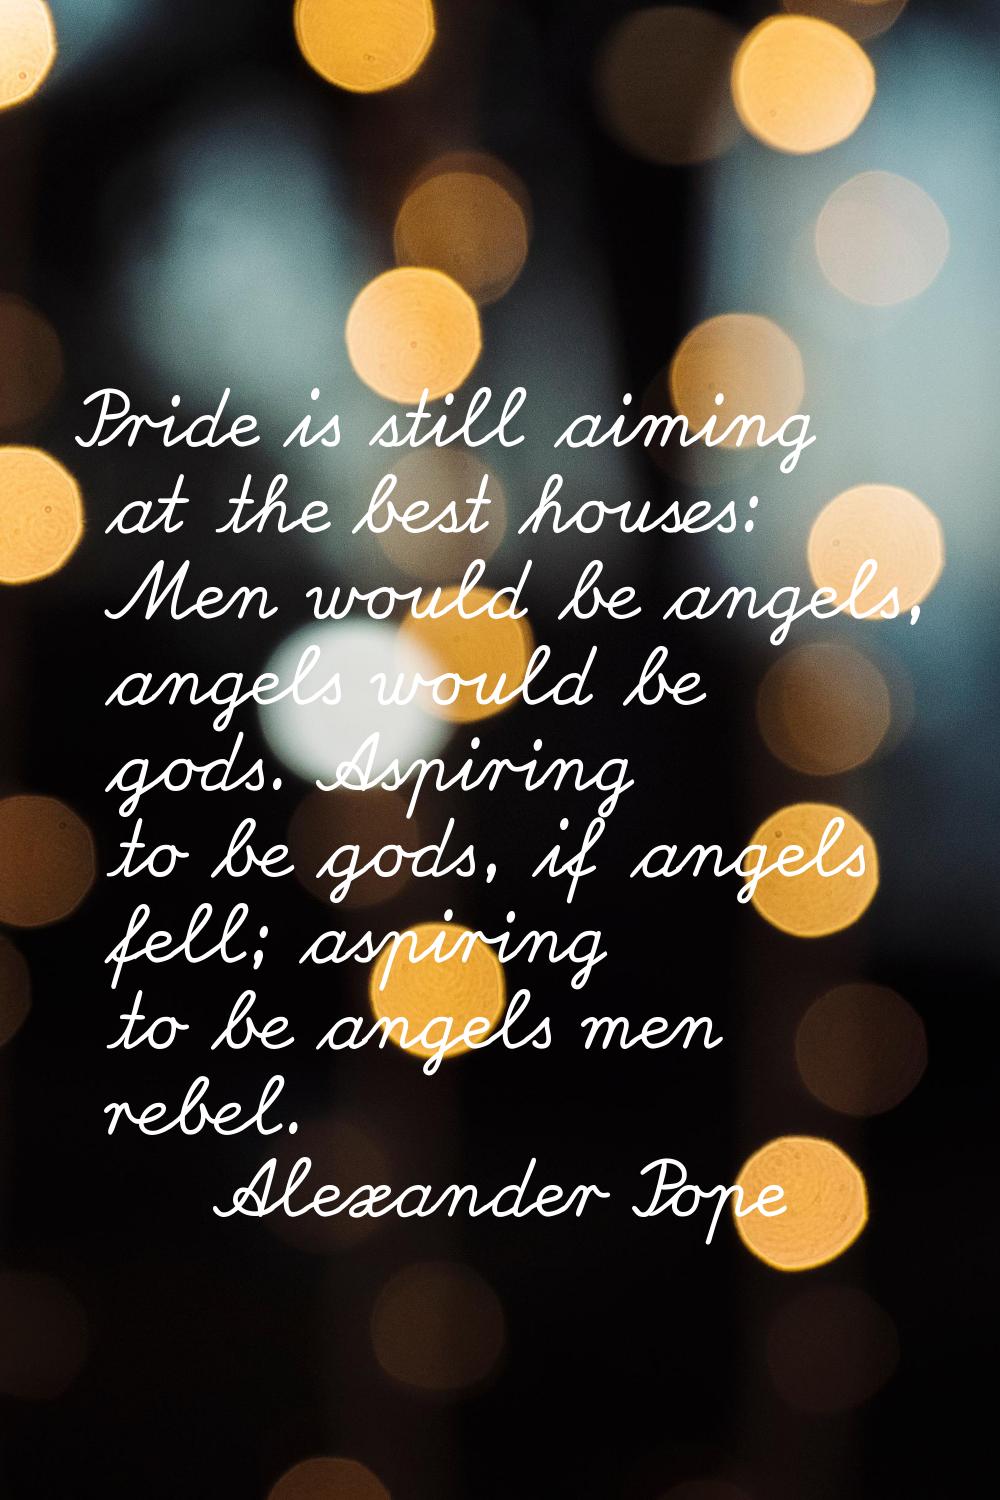 Pride is still aiming at the best houses: Men would be angels, angels would be gods. Aspiring to be